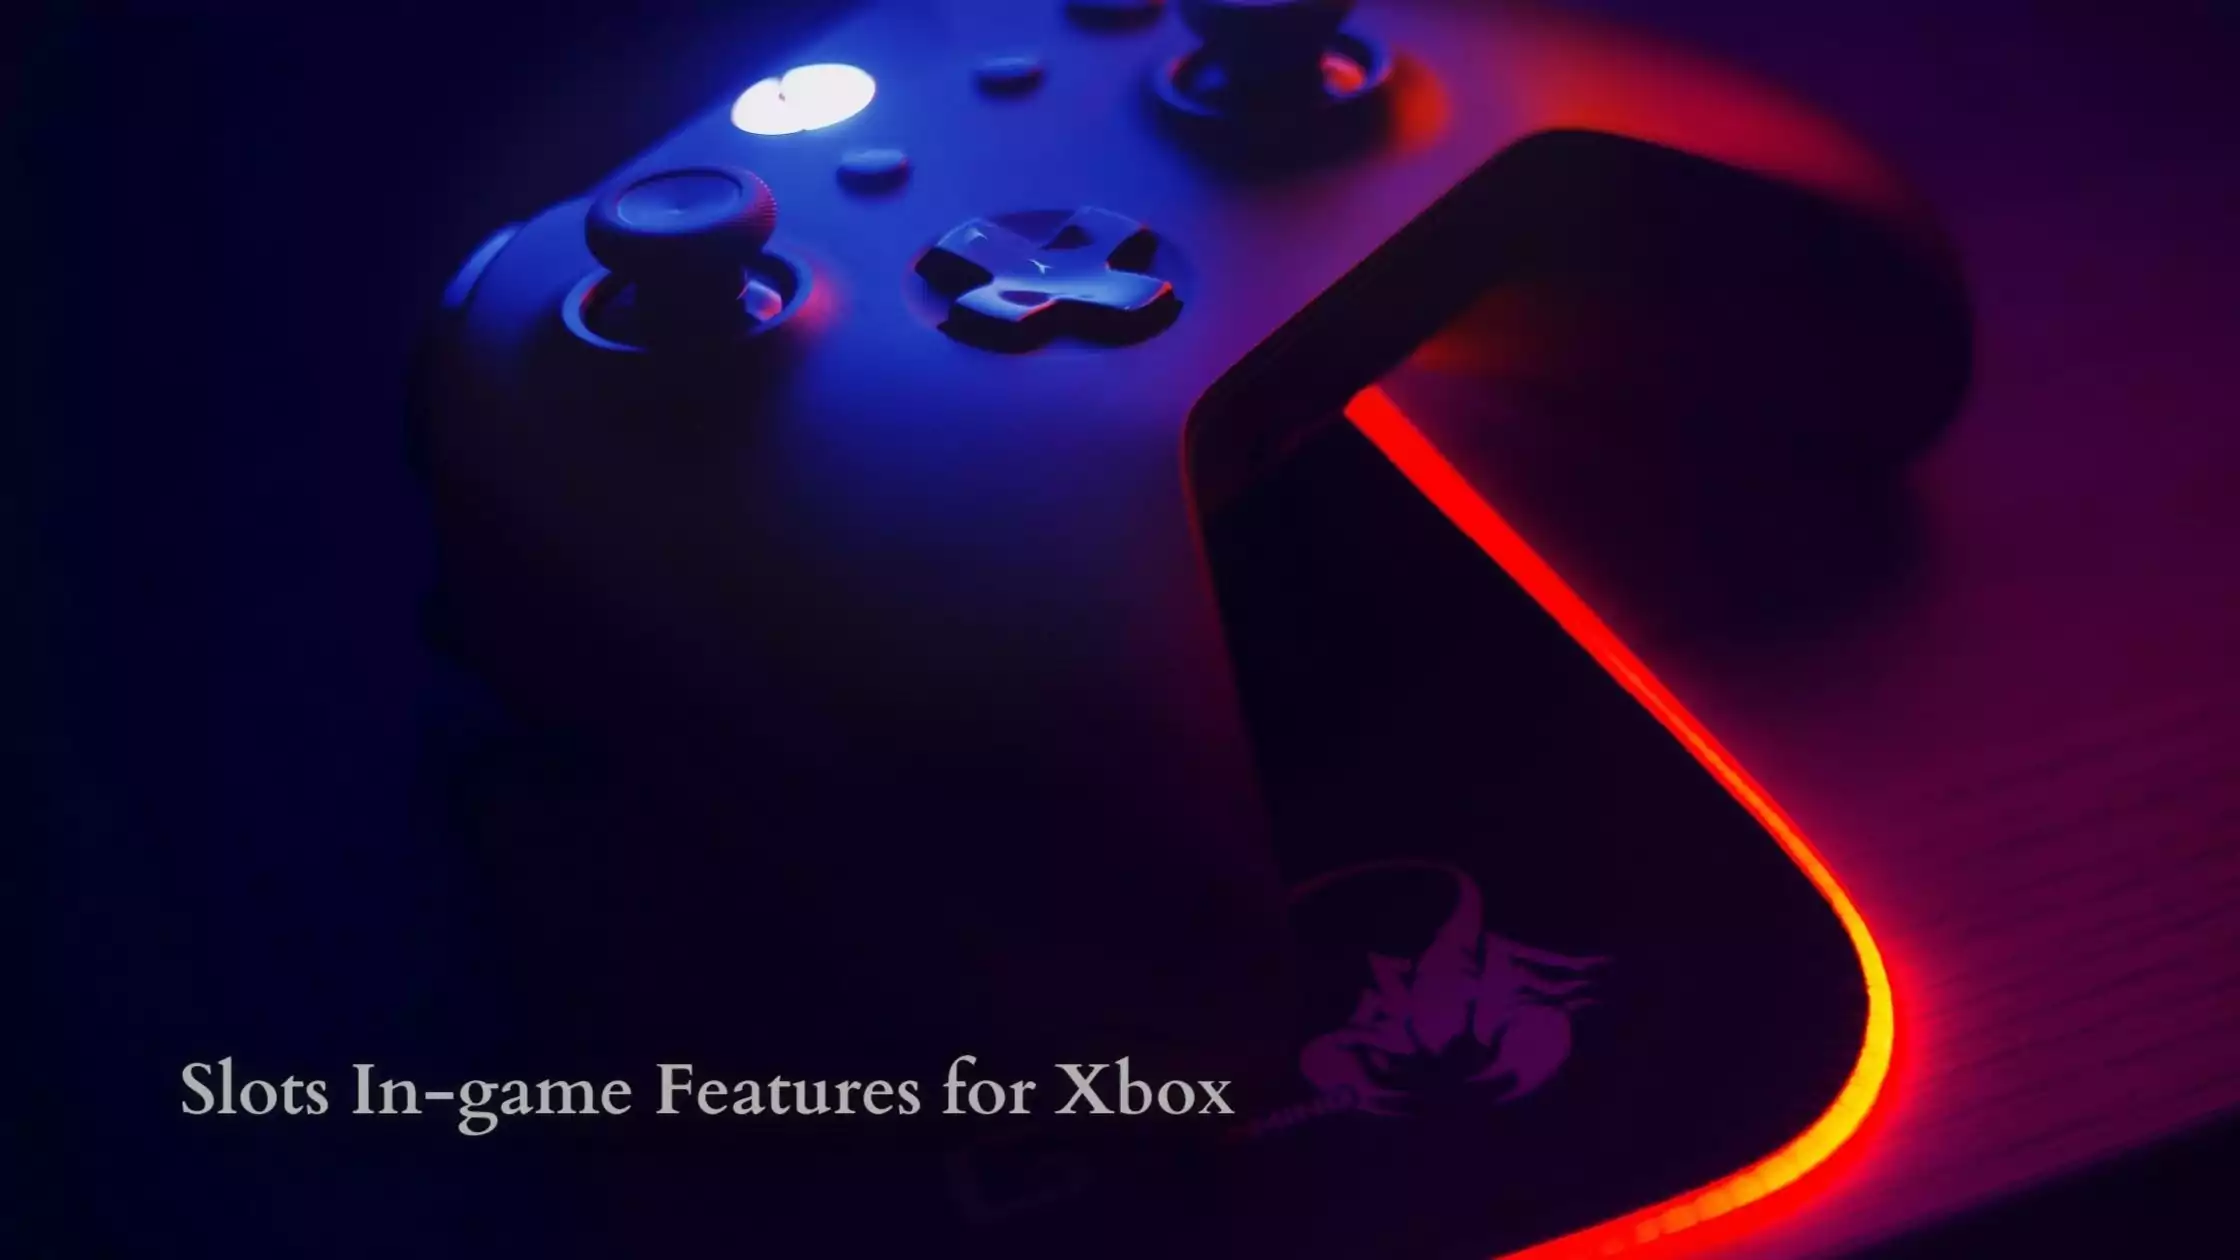 What Are the Slots In-game Features for Xbox